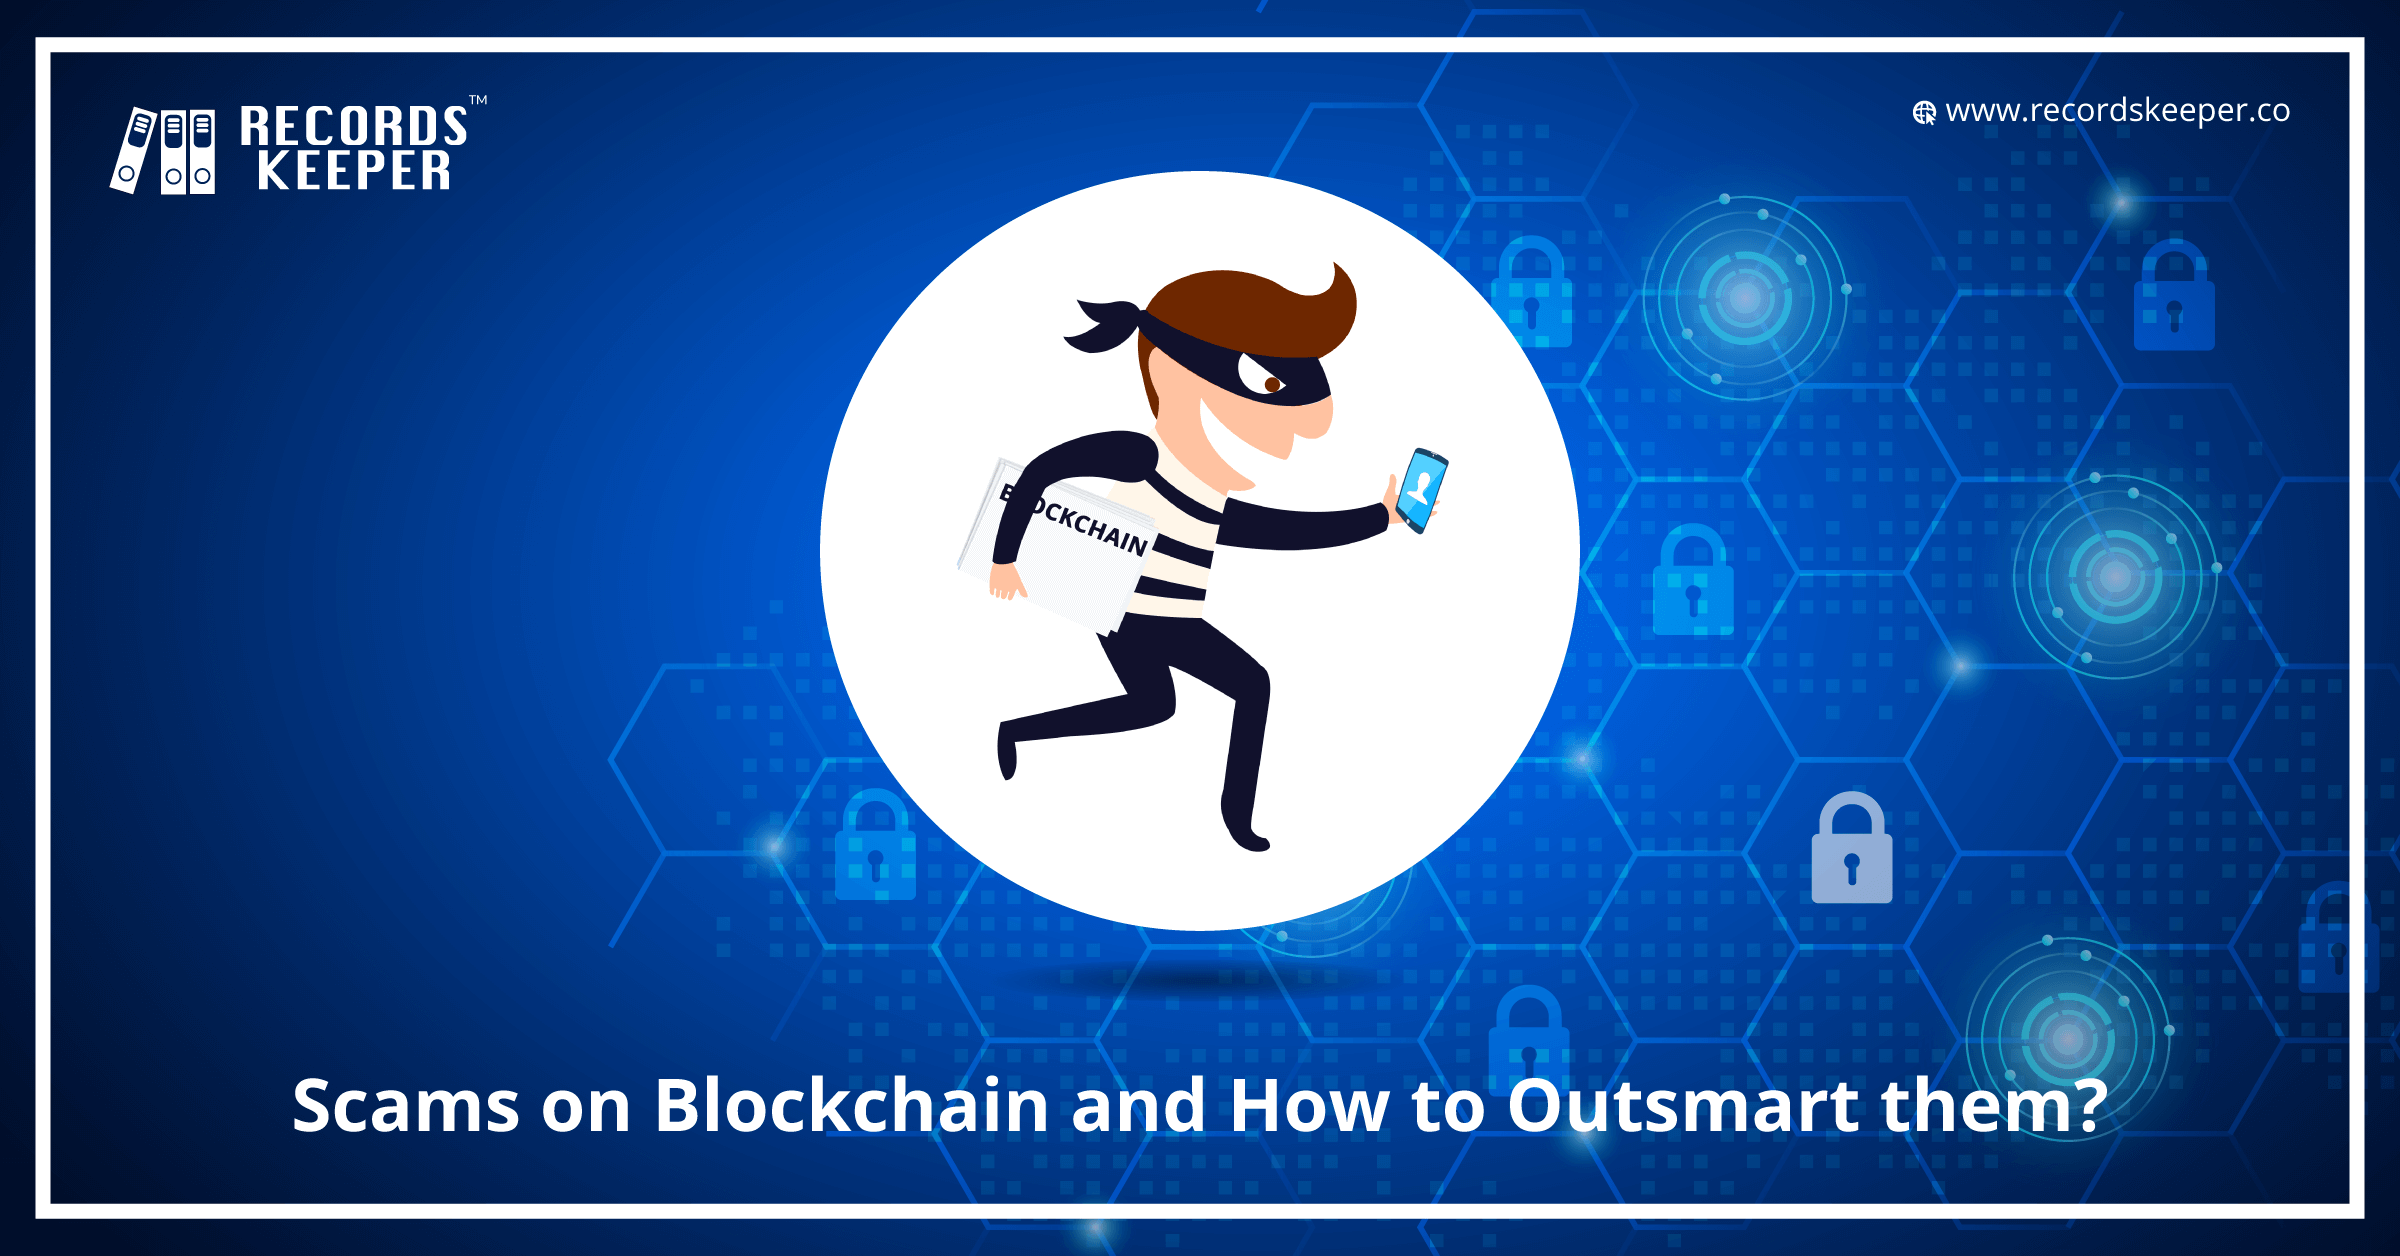 Scams on Blockchain and How to Outsmart Them